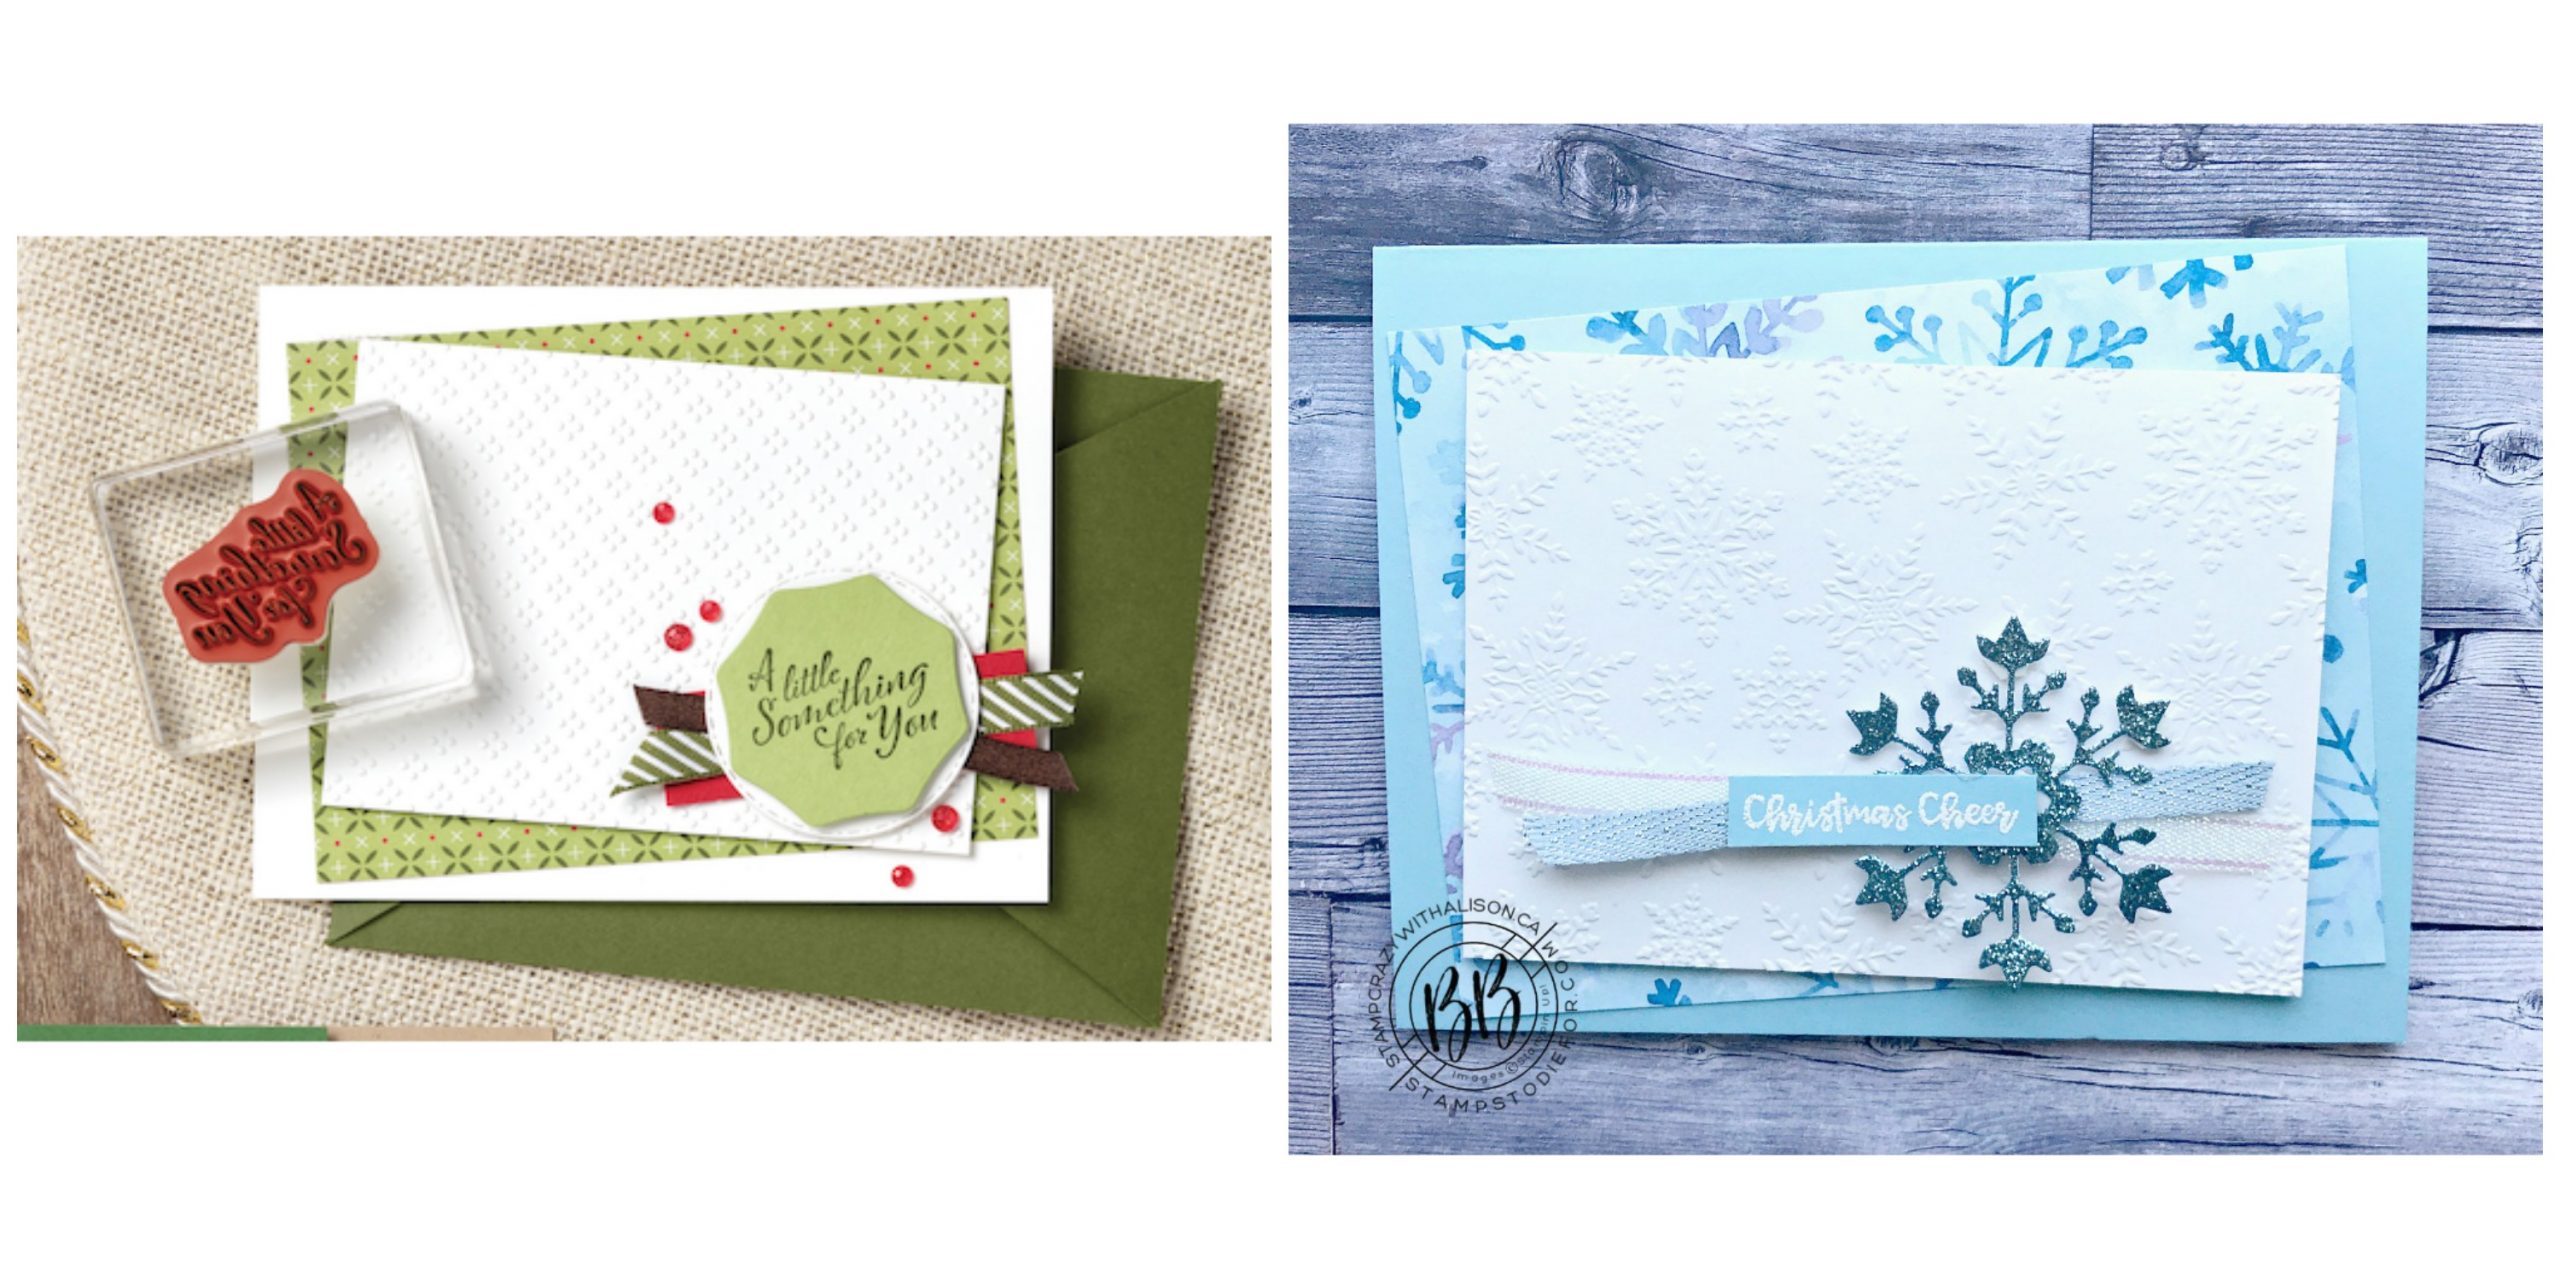 Just in Case with Snowflake Splendor Suite from Stampin’ Up!®